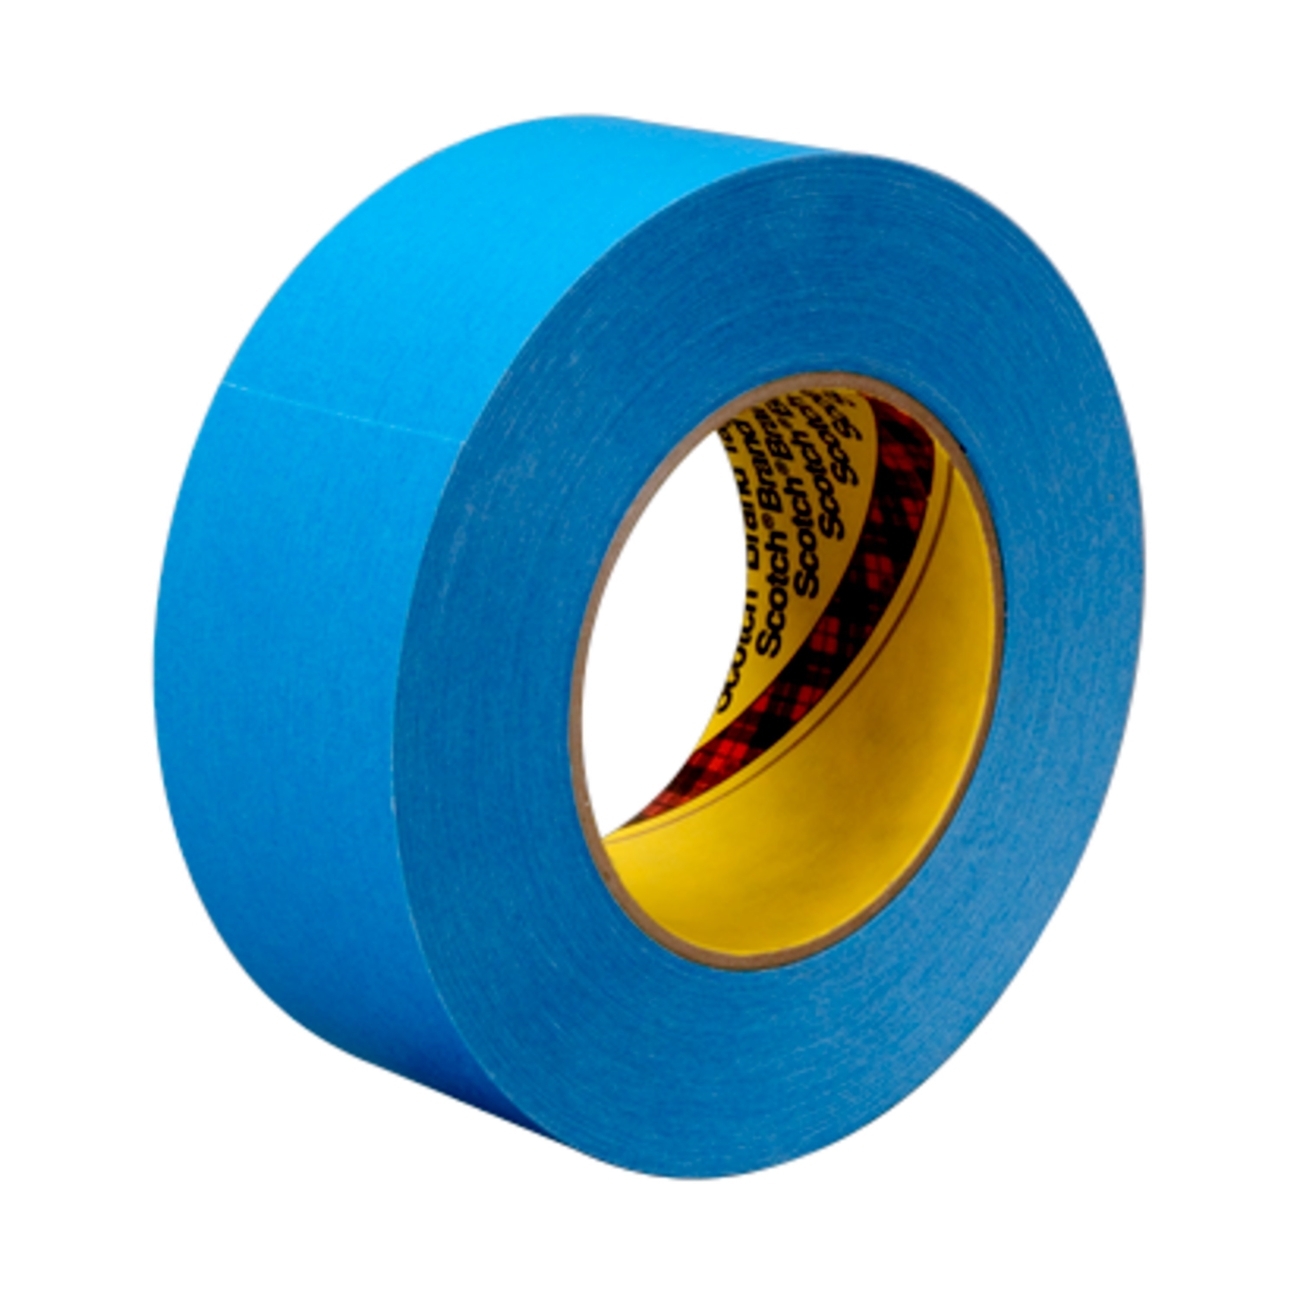 3M Splicing tape for flying splices R9996, water-dispersible, blue, 75 mm x 55 m. 0.07 mm